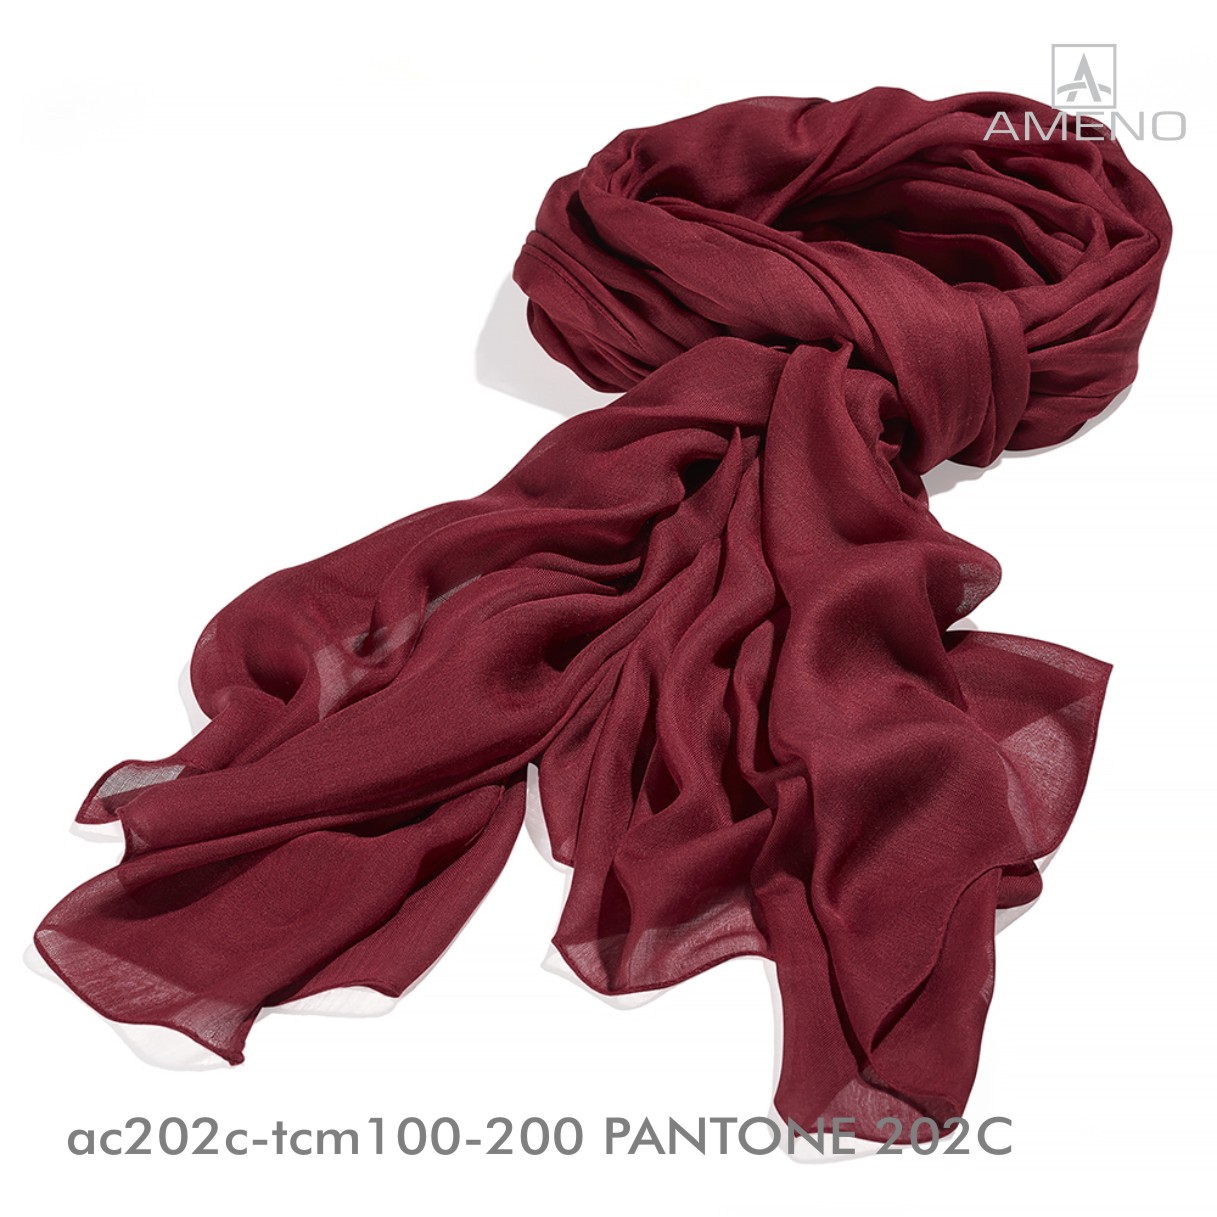 Bordeaux Burgudy Scarf In Many Sizes And Qualities In Stock Adverties